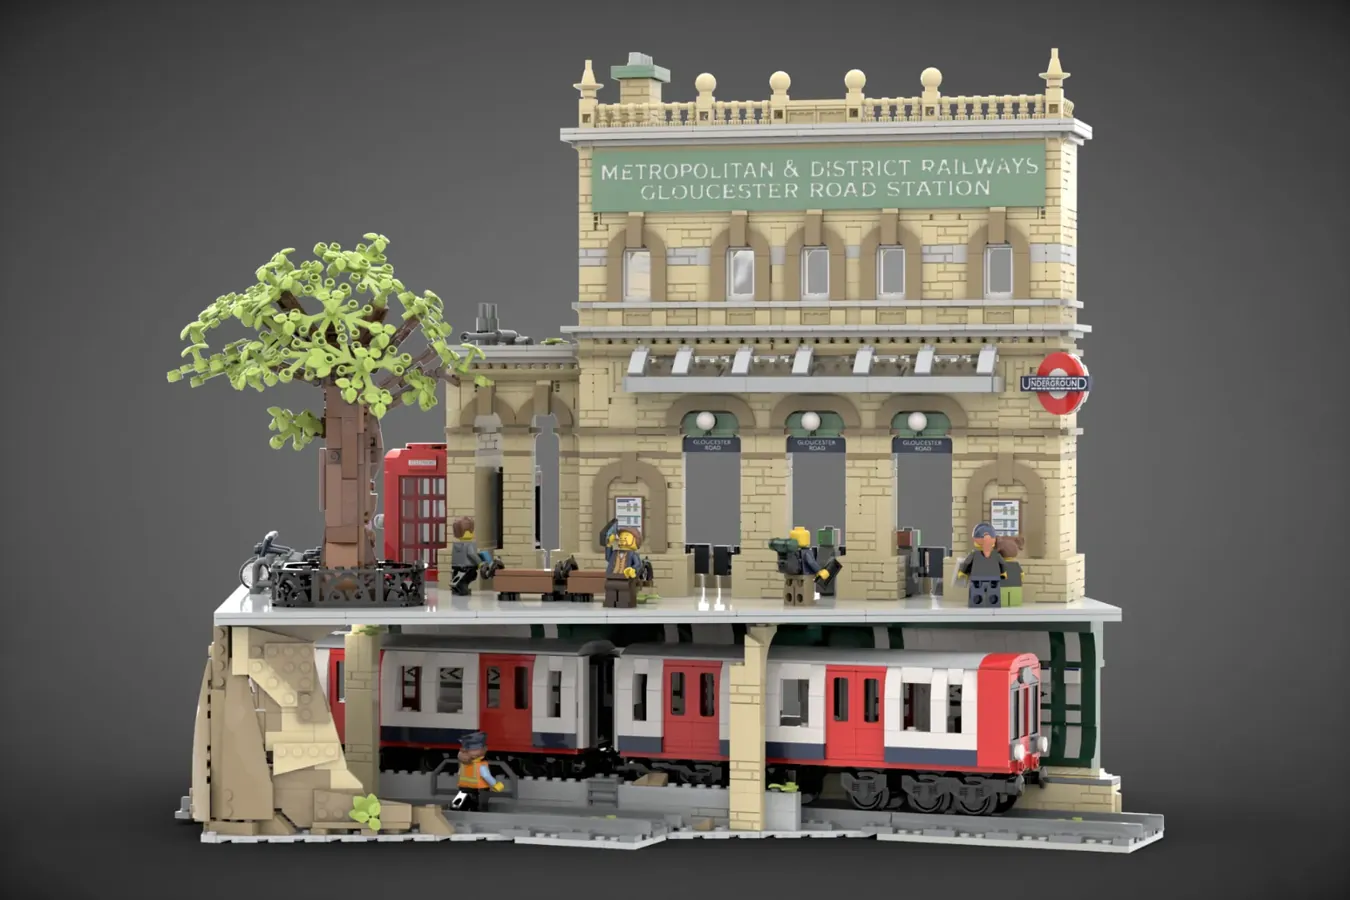 Lego (R) Ideas for London Underground ] has entered the product review!Introducing the 3rd 10,000 support design in 2022